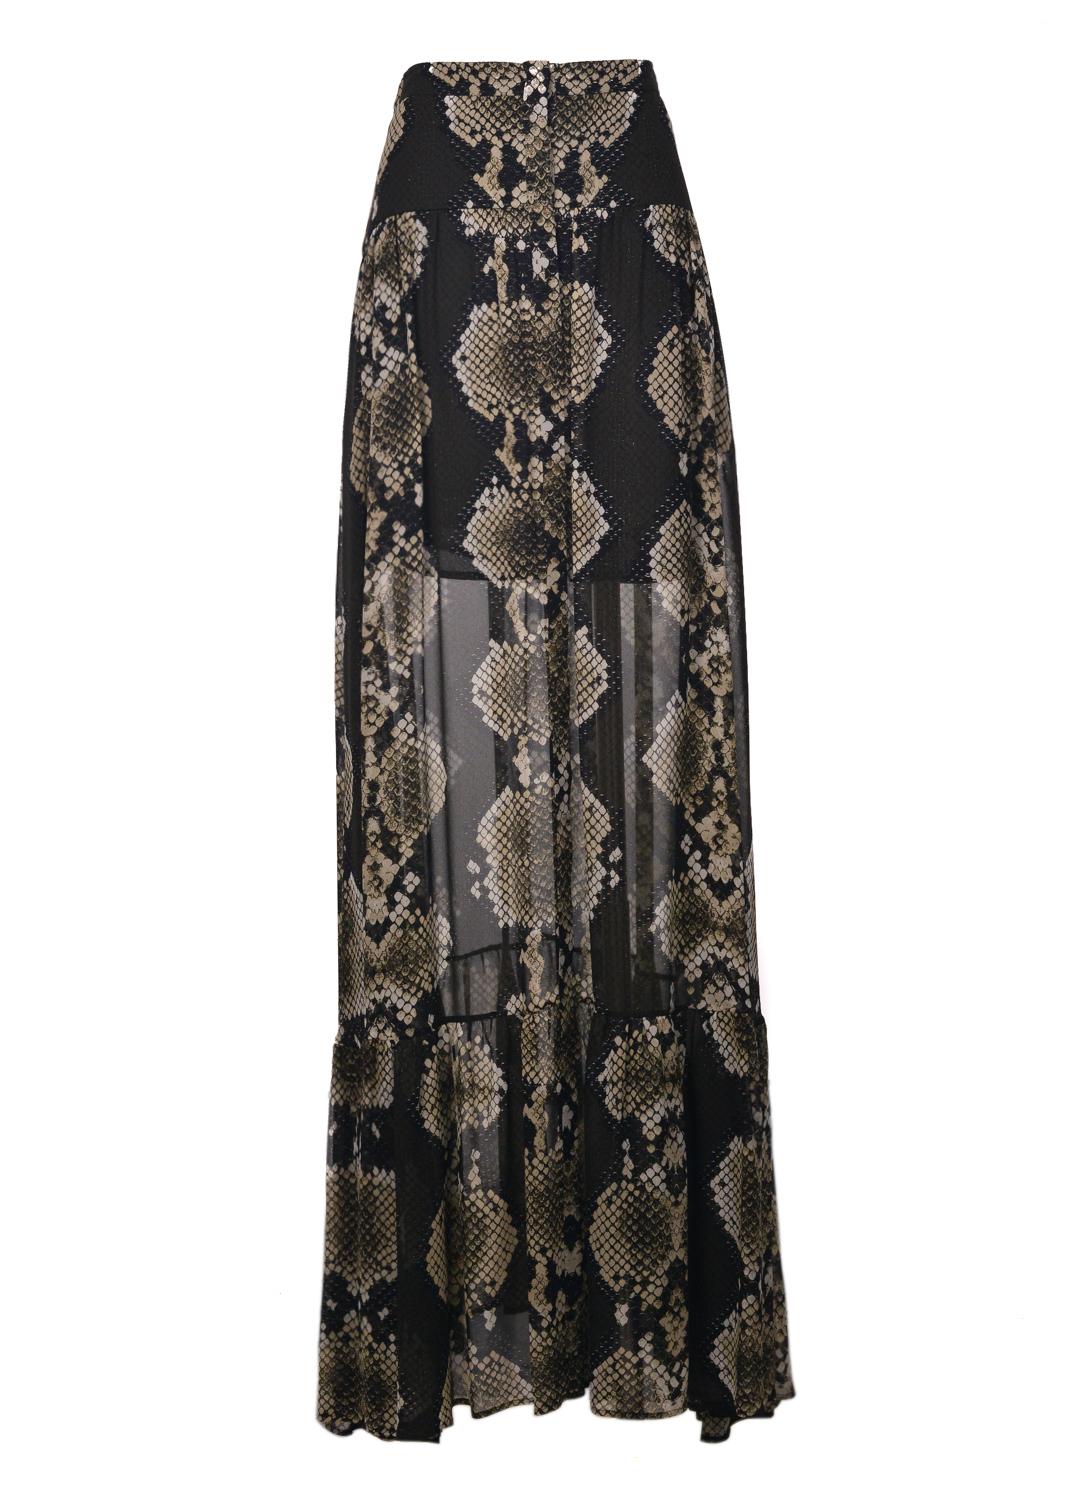 Roberto Cavalli Olive Green and Beige Snake Detailed Maxi Skirt. This skirt features a floor length dark green and snake skin detailing.  



100% Satin 
Floor Length 
Elastic Waist 
Lined with Black Satin Lining 
Made In Italy 